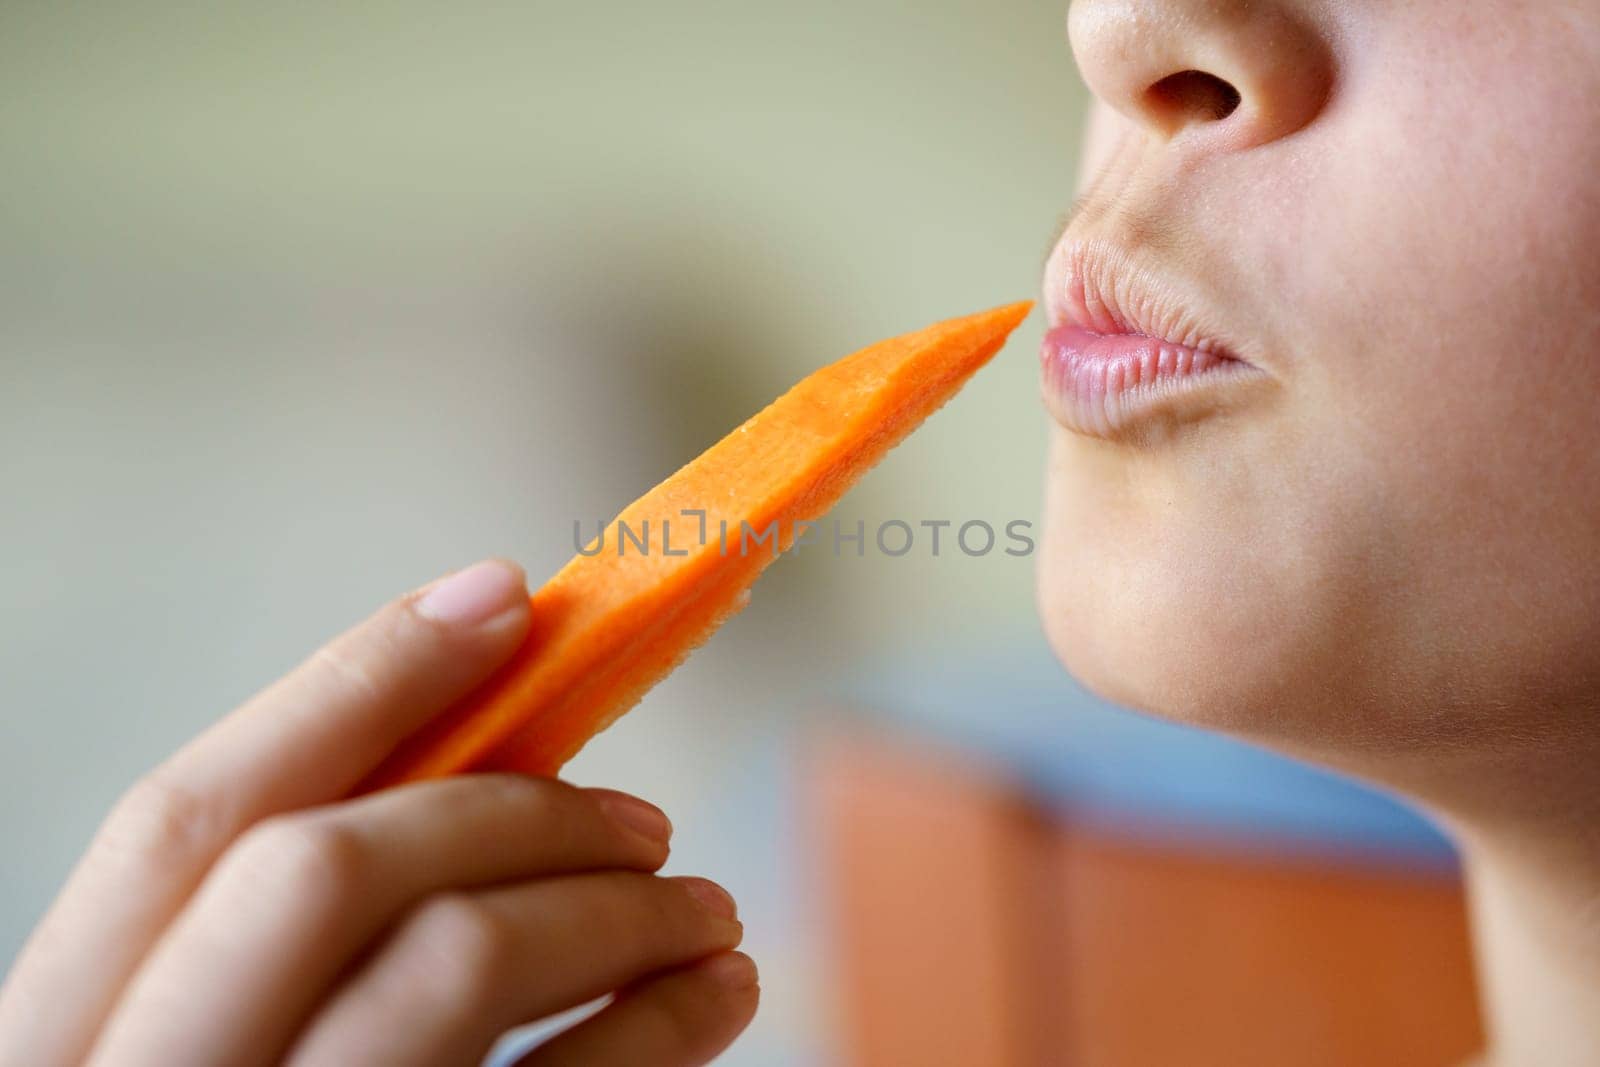 Crop anonymous young girl puckering lips while holding fresh carrot slice at home